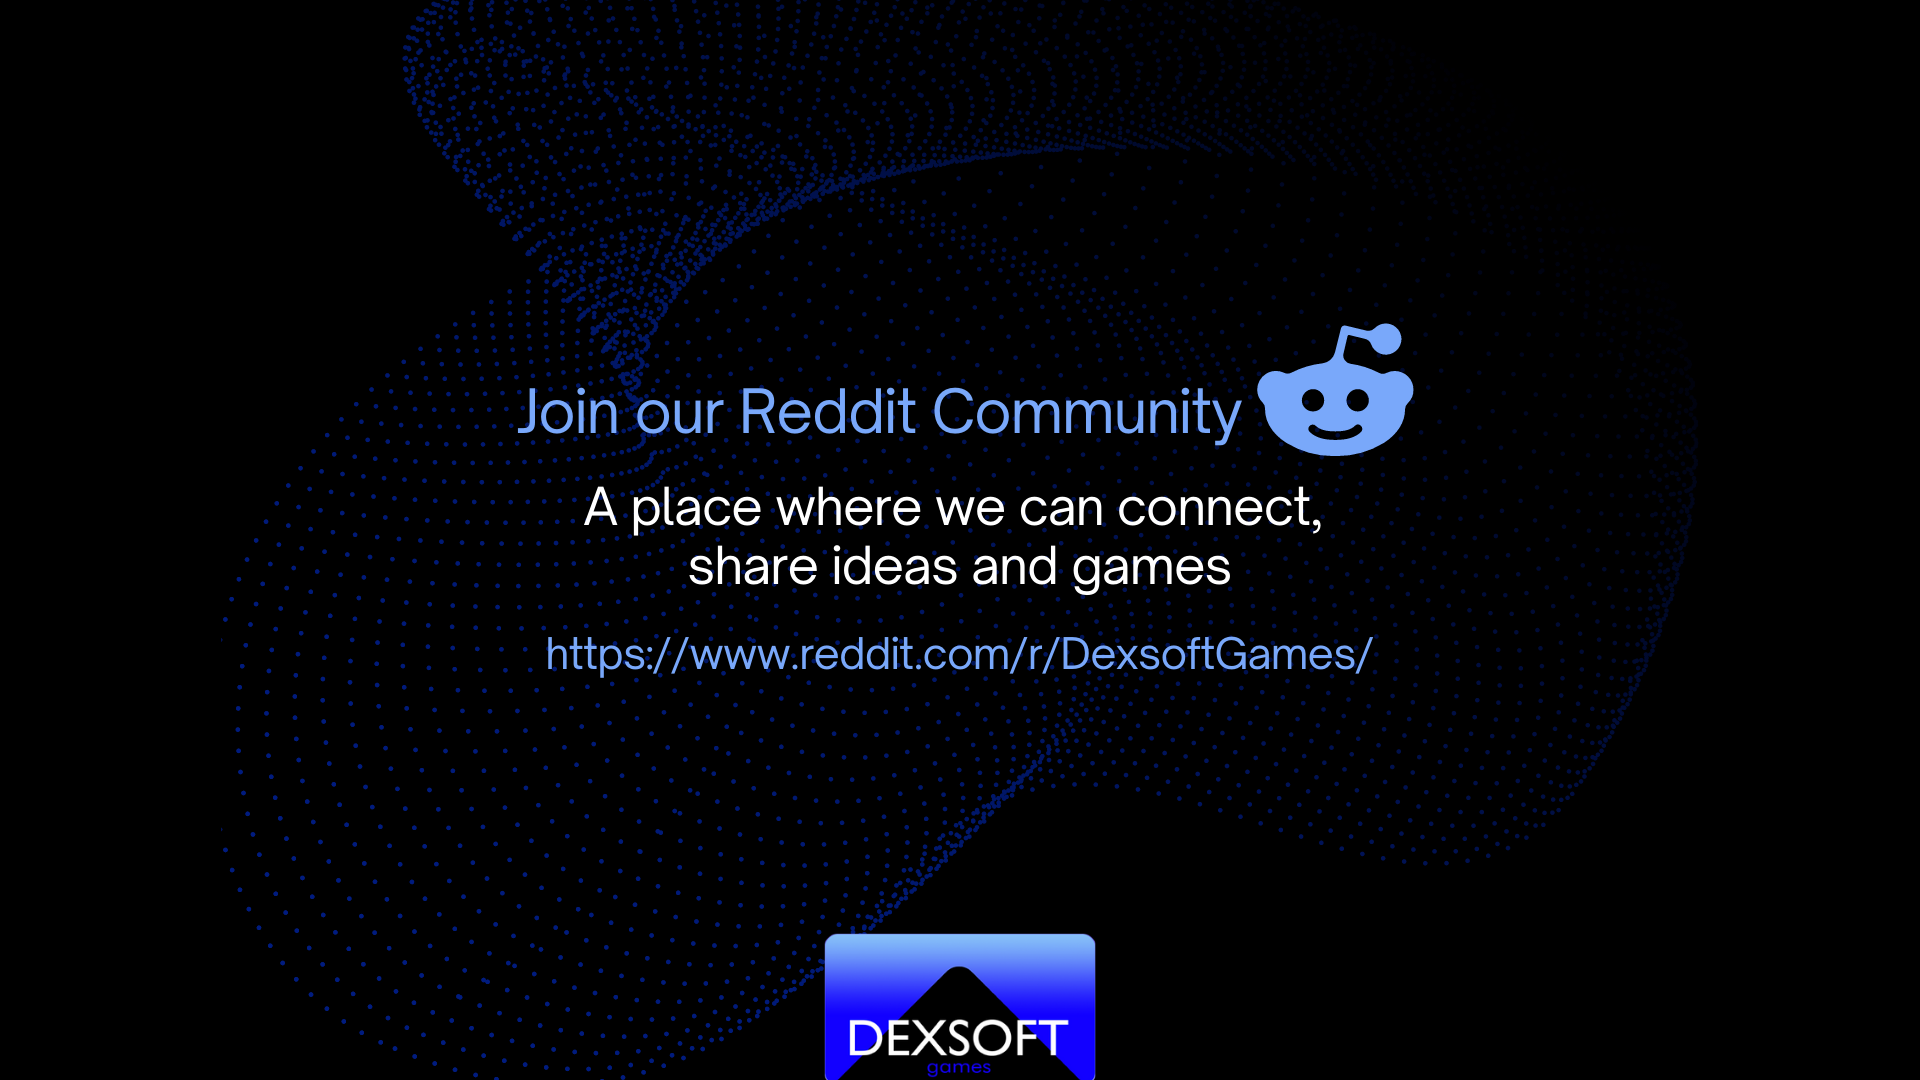 An image showing an invitation to the official Reddit community of Dexsoft Games